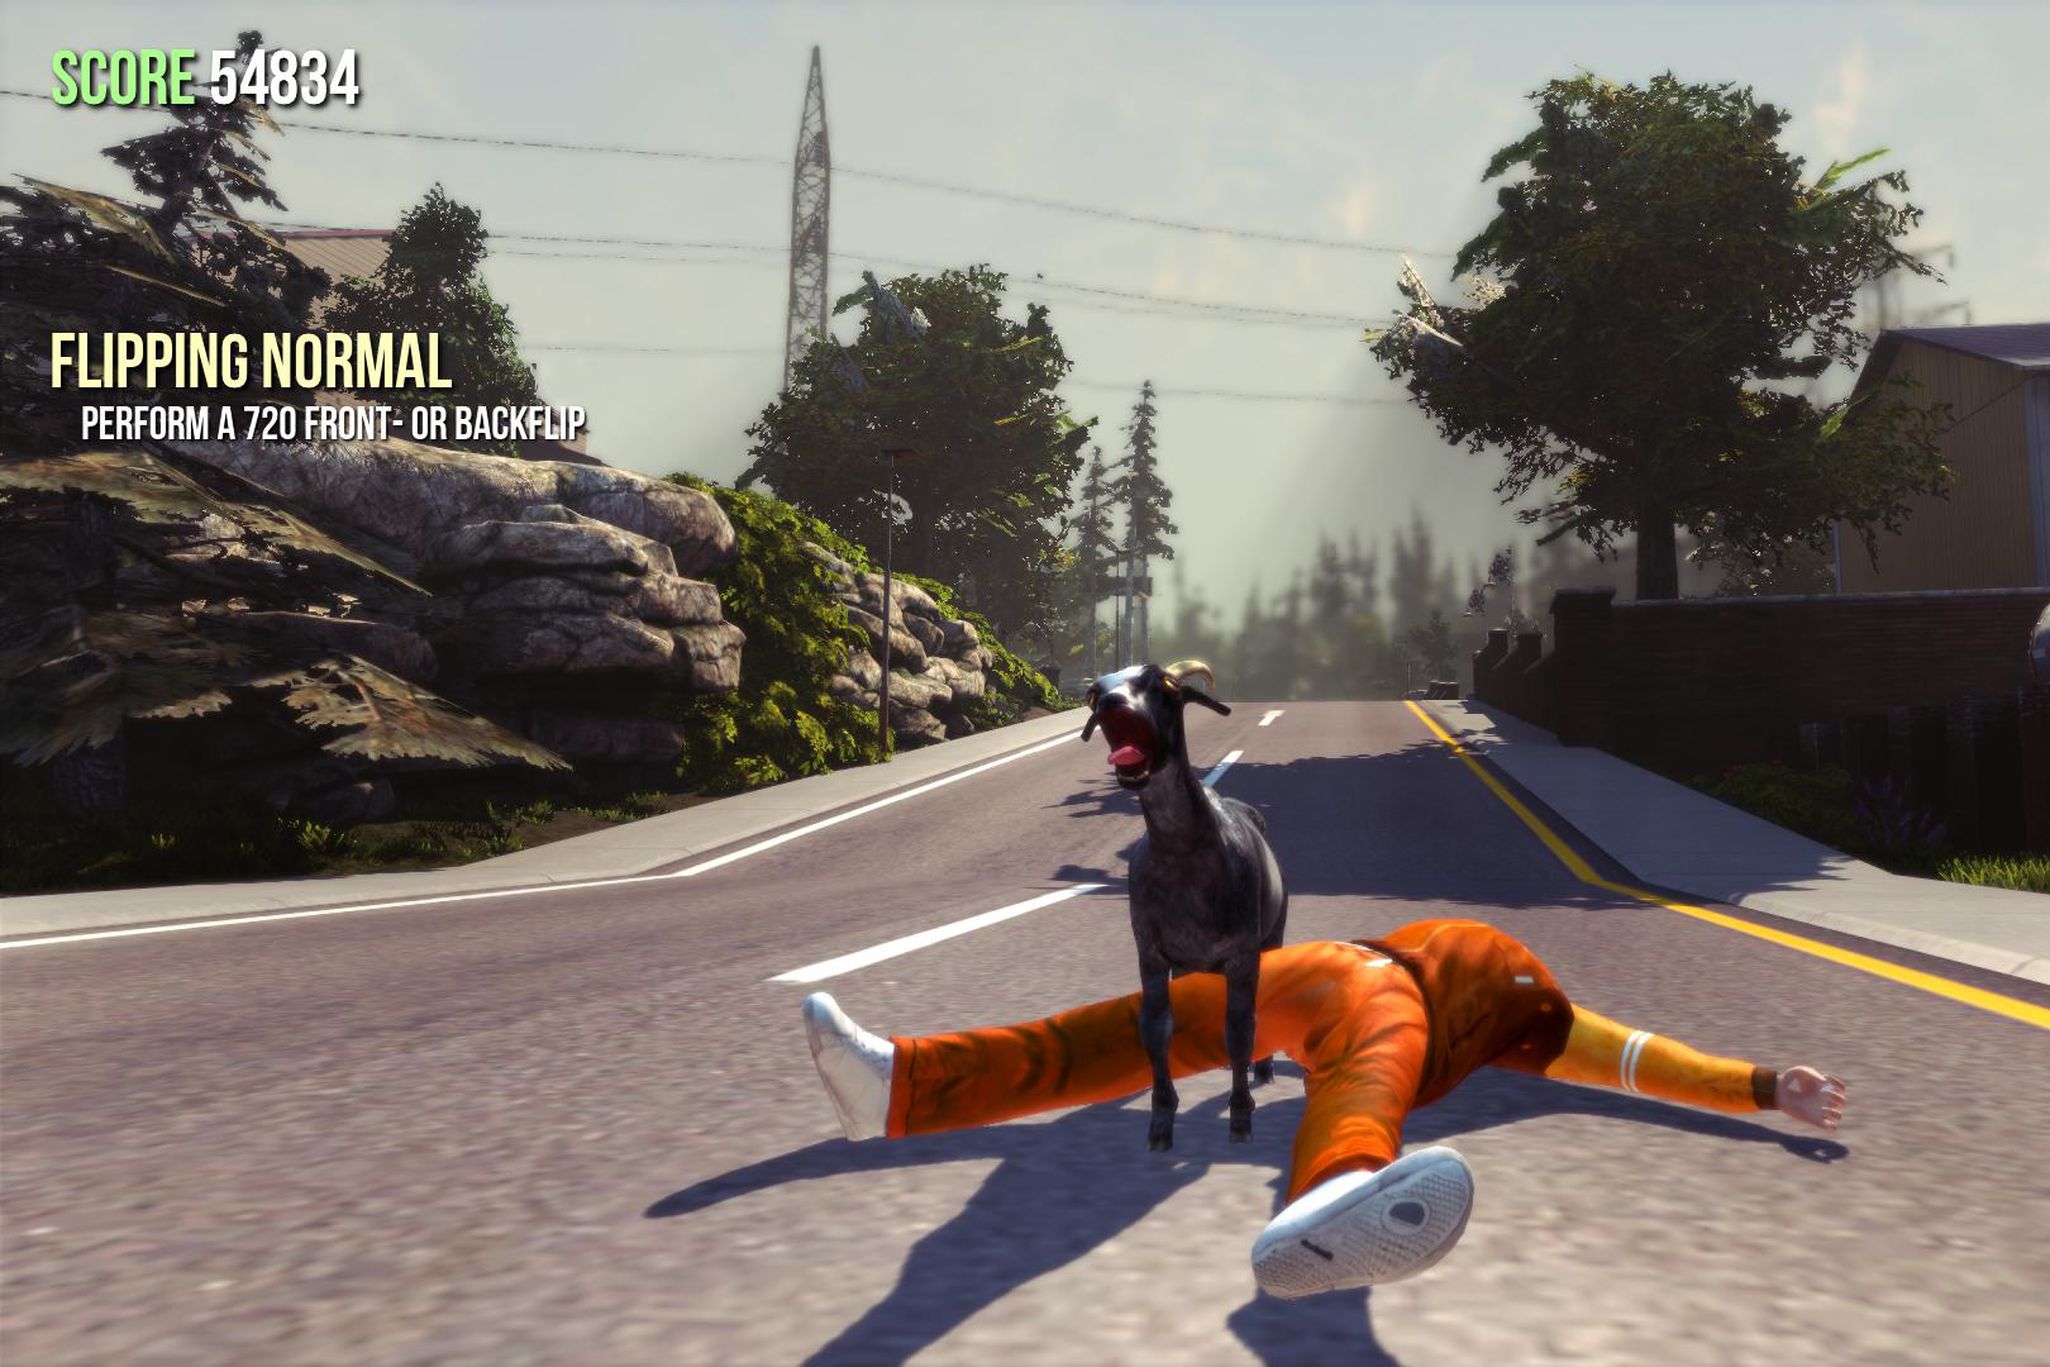 If you play one goat simulator in make it this one